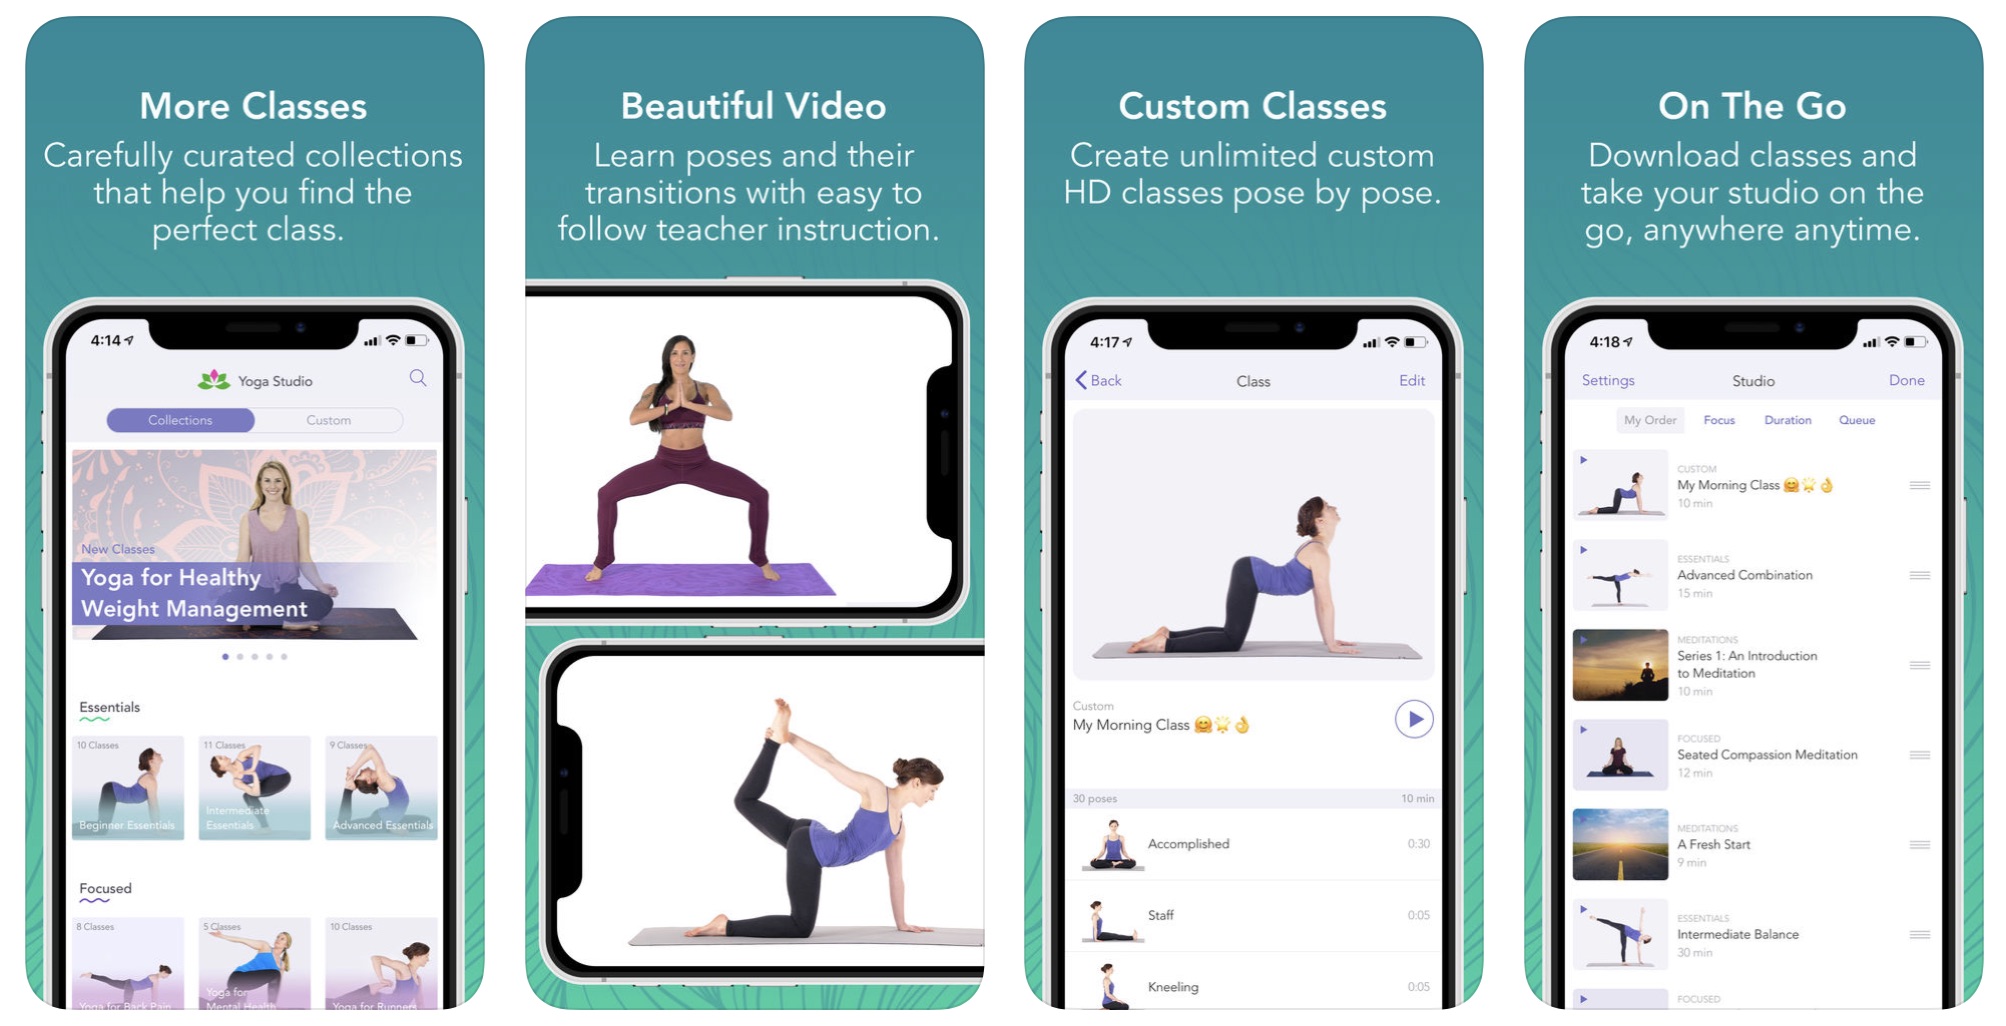 10 best yoga apps for Android to strengthen that core - Android Authority